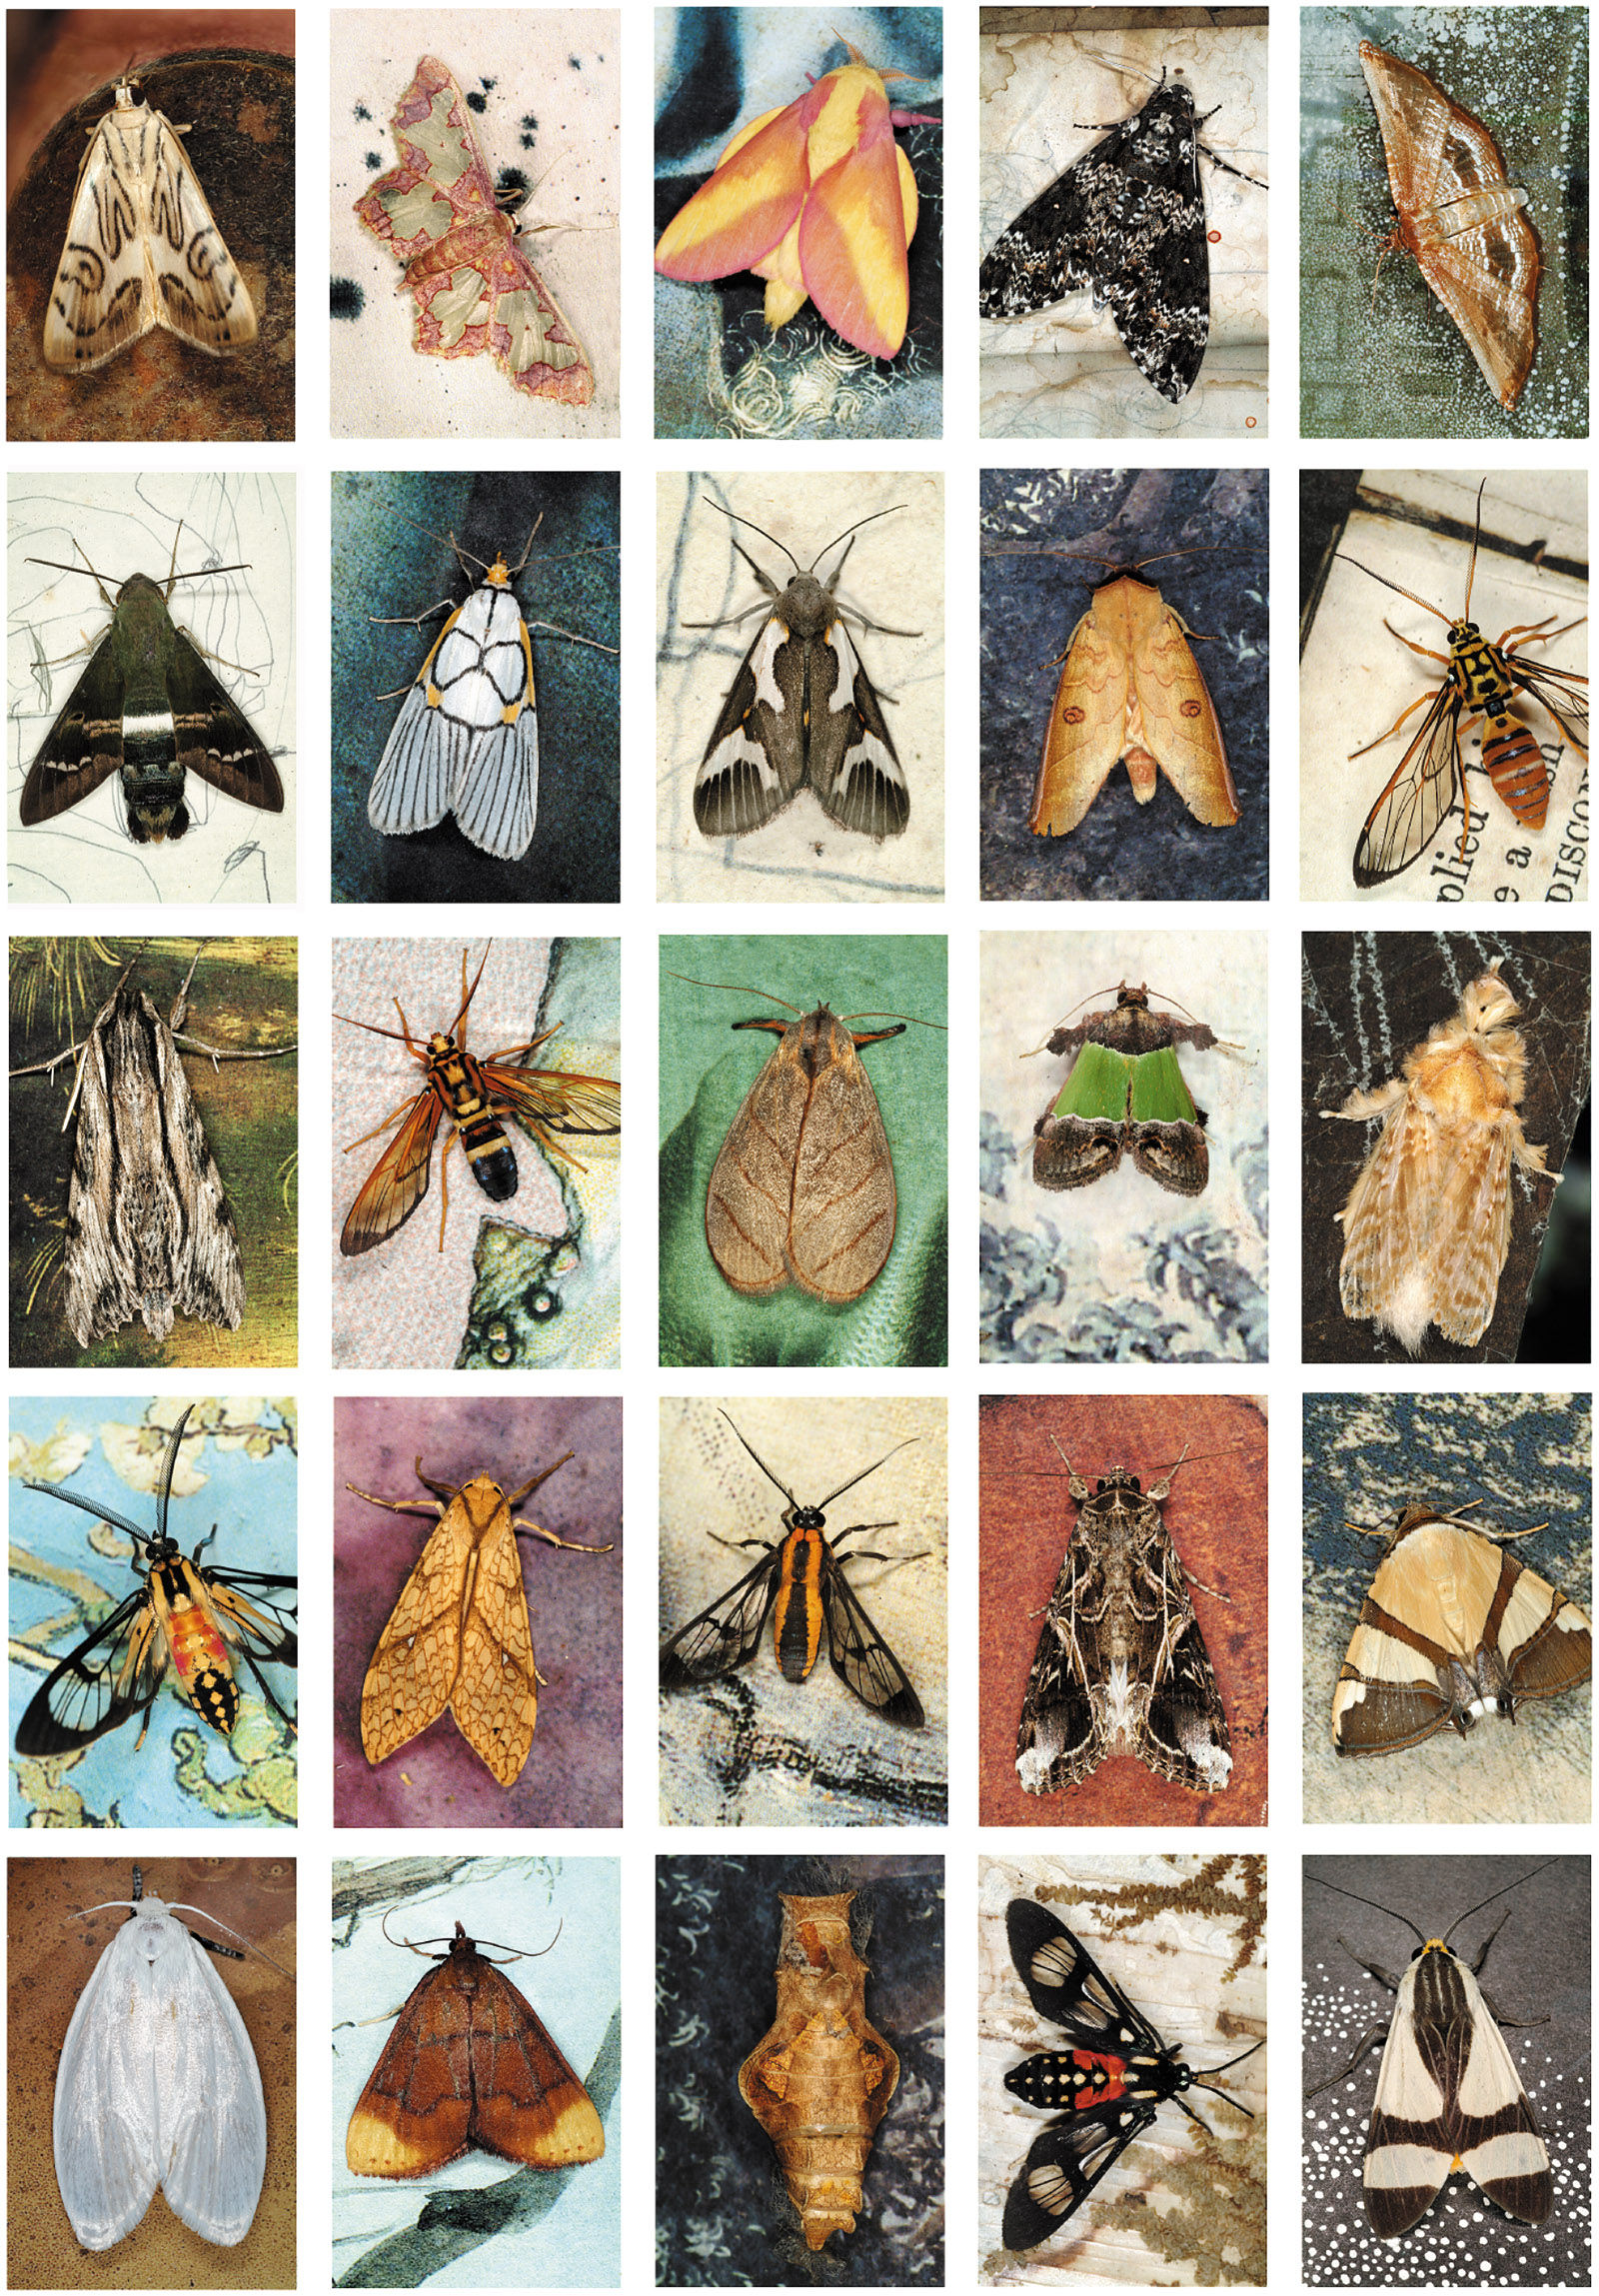 Emmet Gowin: Mariposas Nocturnas Index #44, Bolivia, 2011; from ‘Hidden Likeness: Photographer Emmet Gowin at the Morgan,’ a recent exhibition at the Morgan Library and Museum. Gowin’s new book, Mariposas Nocturnas: A Study of Diversity and Beauty, collects fifty-one of his moth grids and will be published by Princeton University Press in September 2017.